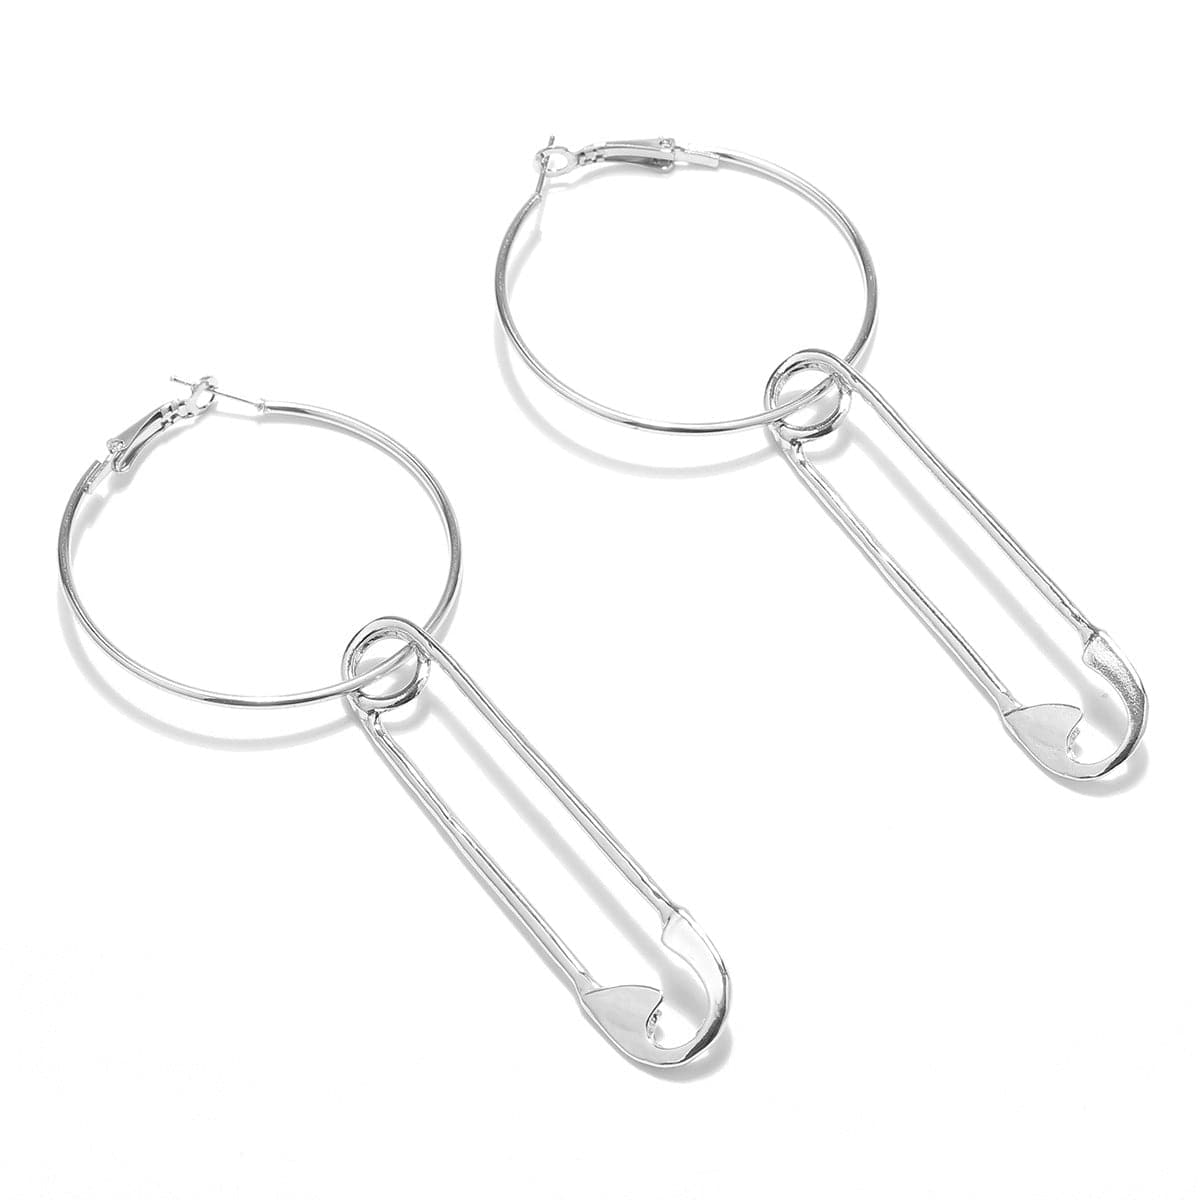 Silver-Plated Safety Pin Drop Earrings